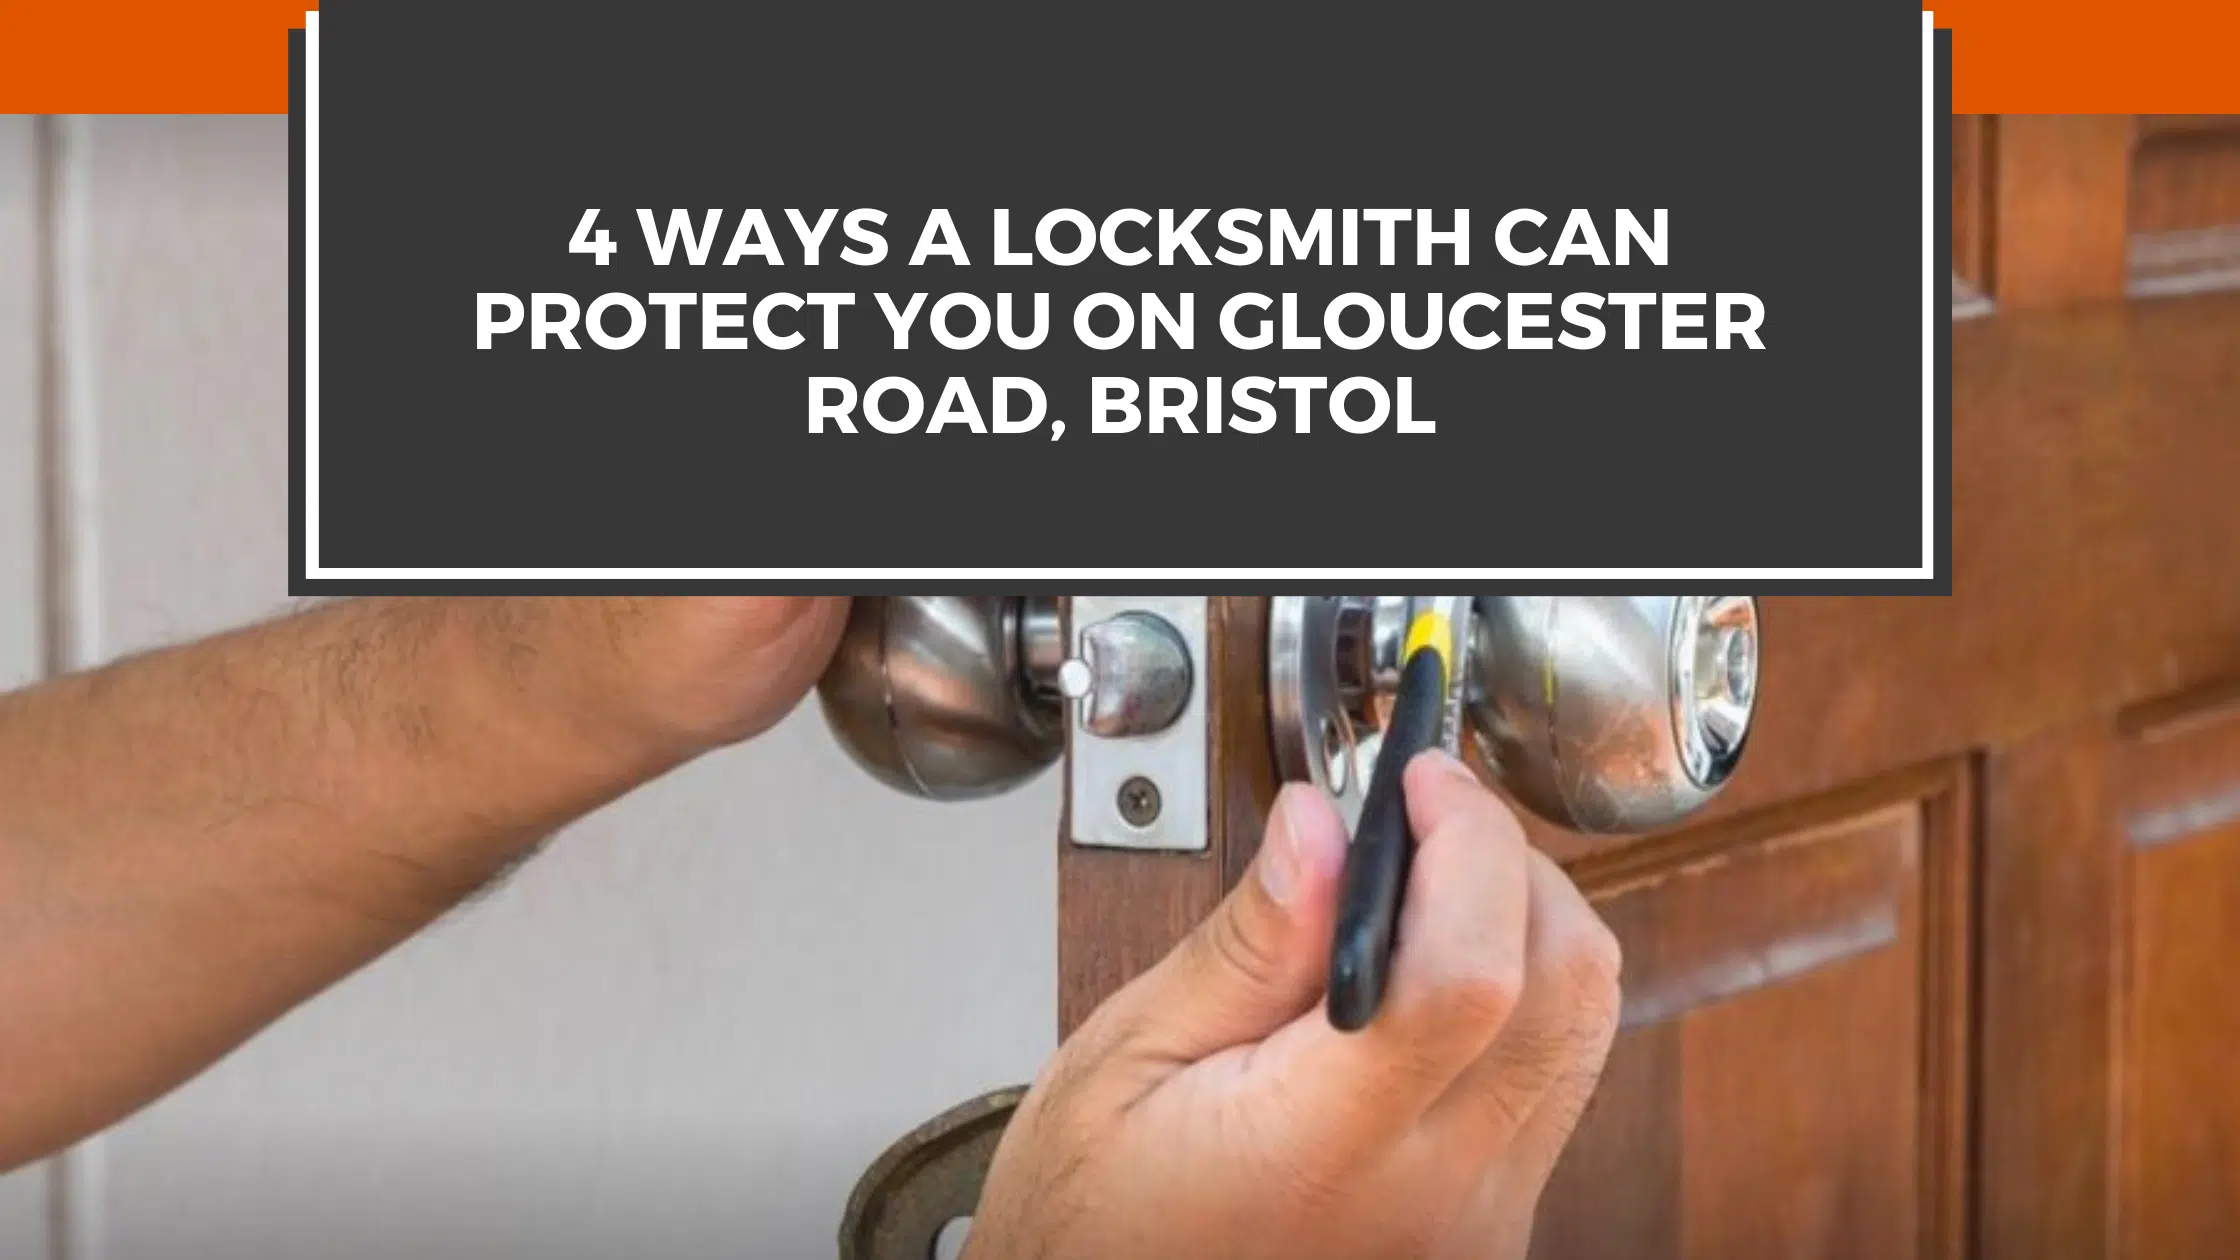 4 Ways A Locksmith Can Protect You on Gloucester Road, Bristol